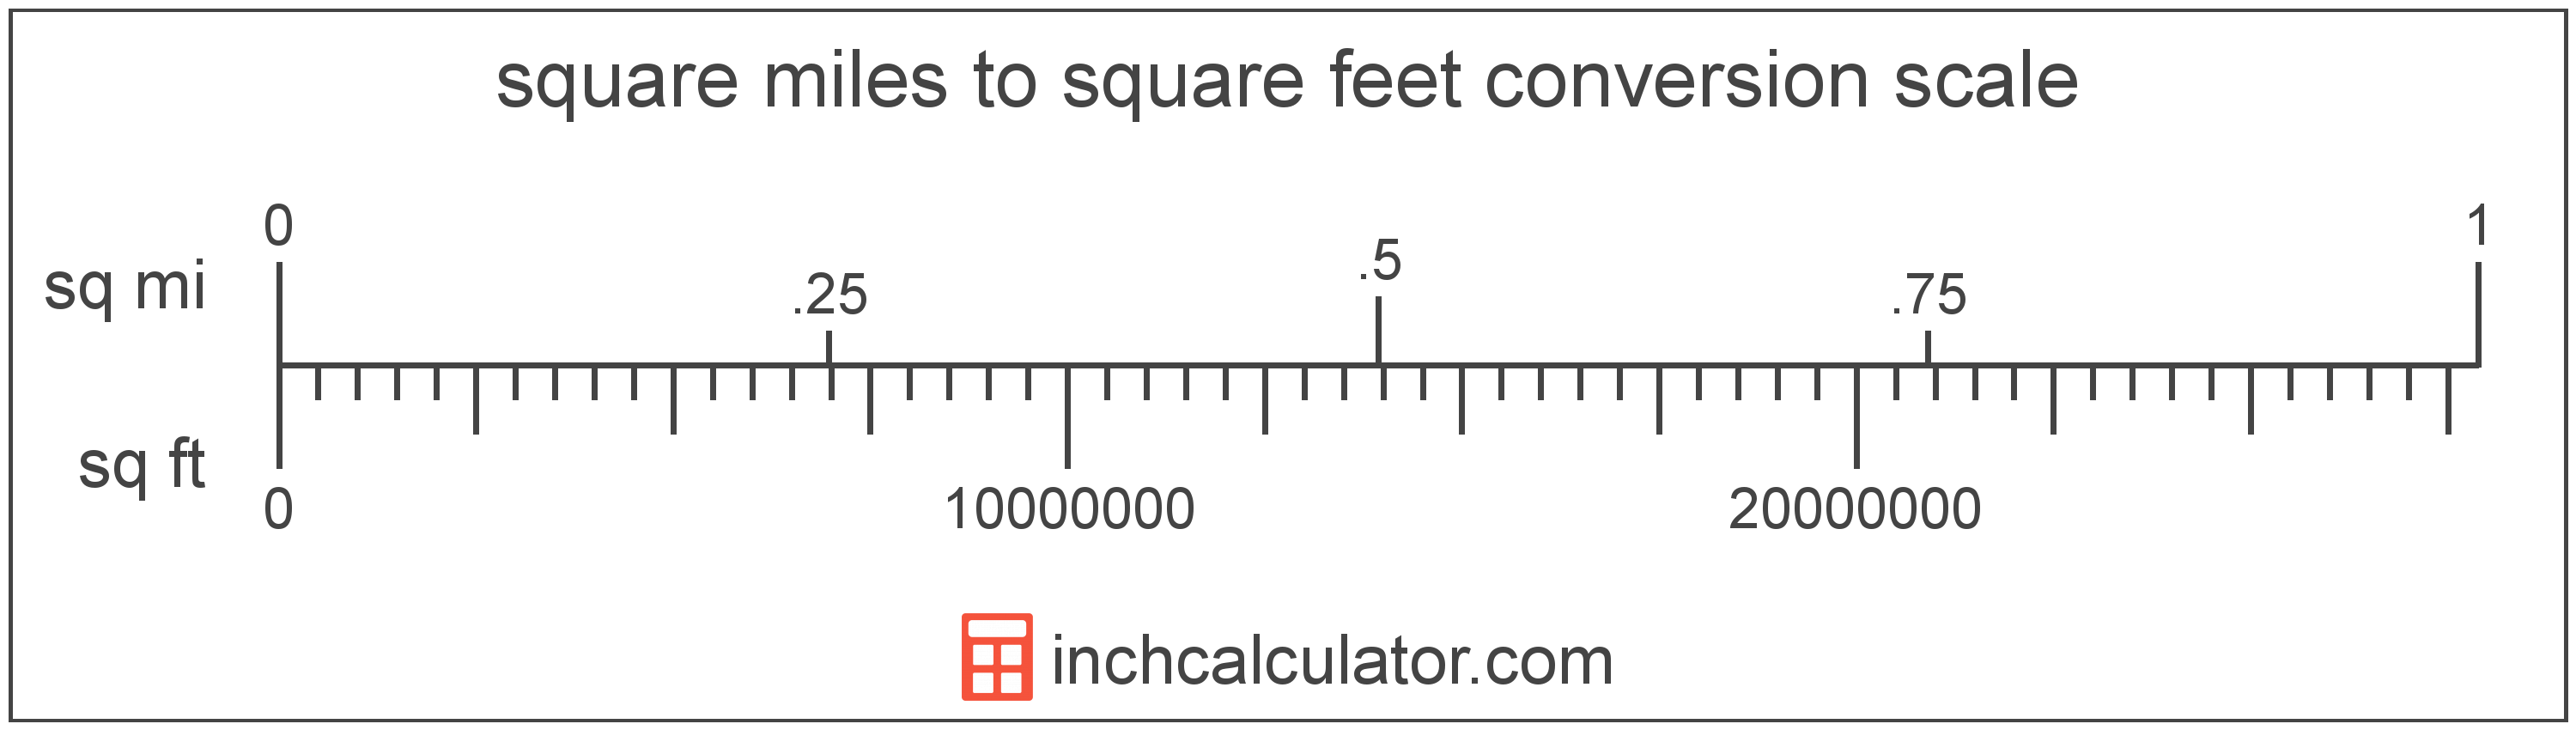 conversion scale showing square miles and equivalent square feet area values